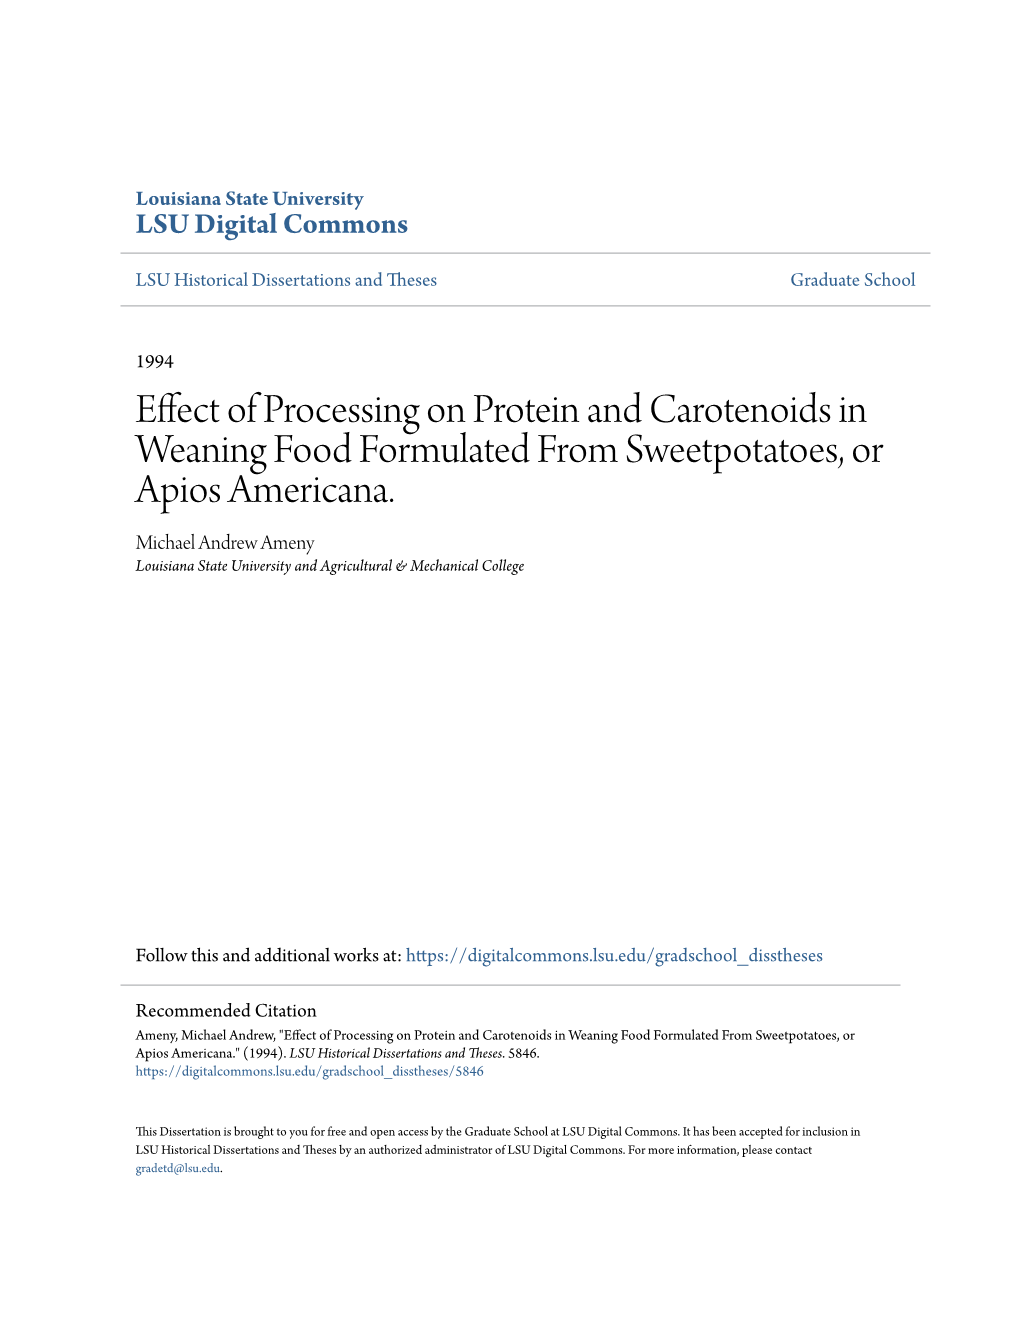 Effect of Processing on Protein and Carotenoids in Weaning Food Formulated from Sweetpotatoes, Or Apios Americana